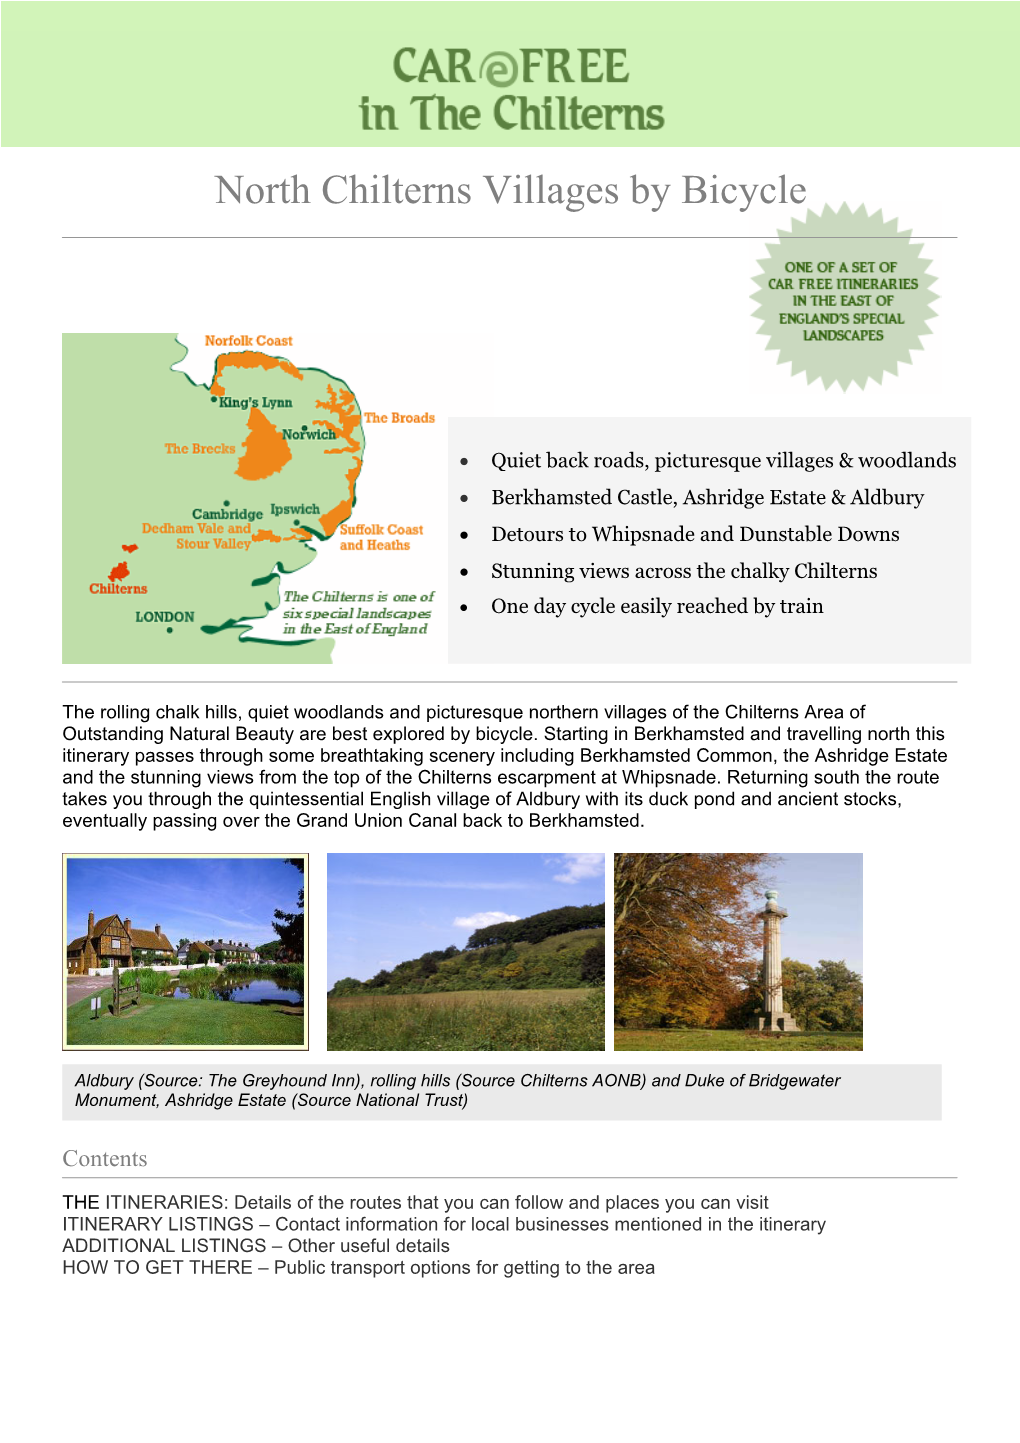 Northern Chiltern Villages by Bicycle Itinerary